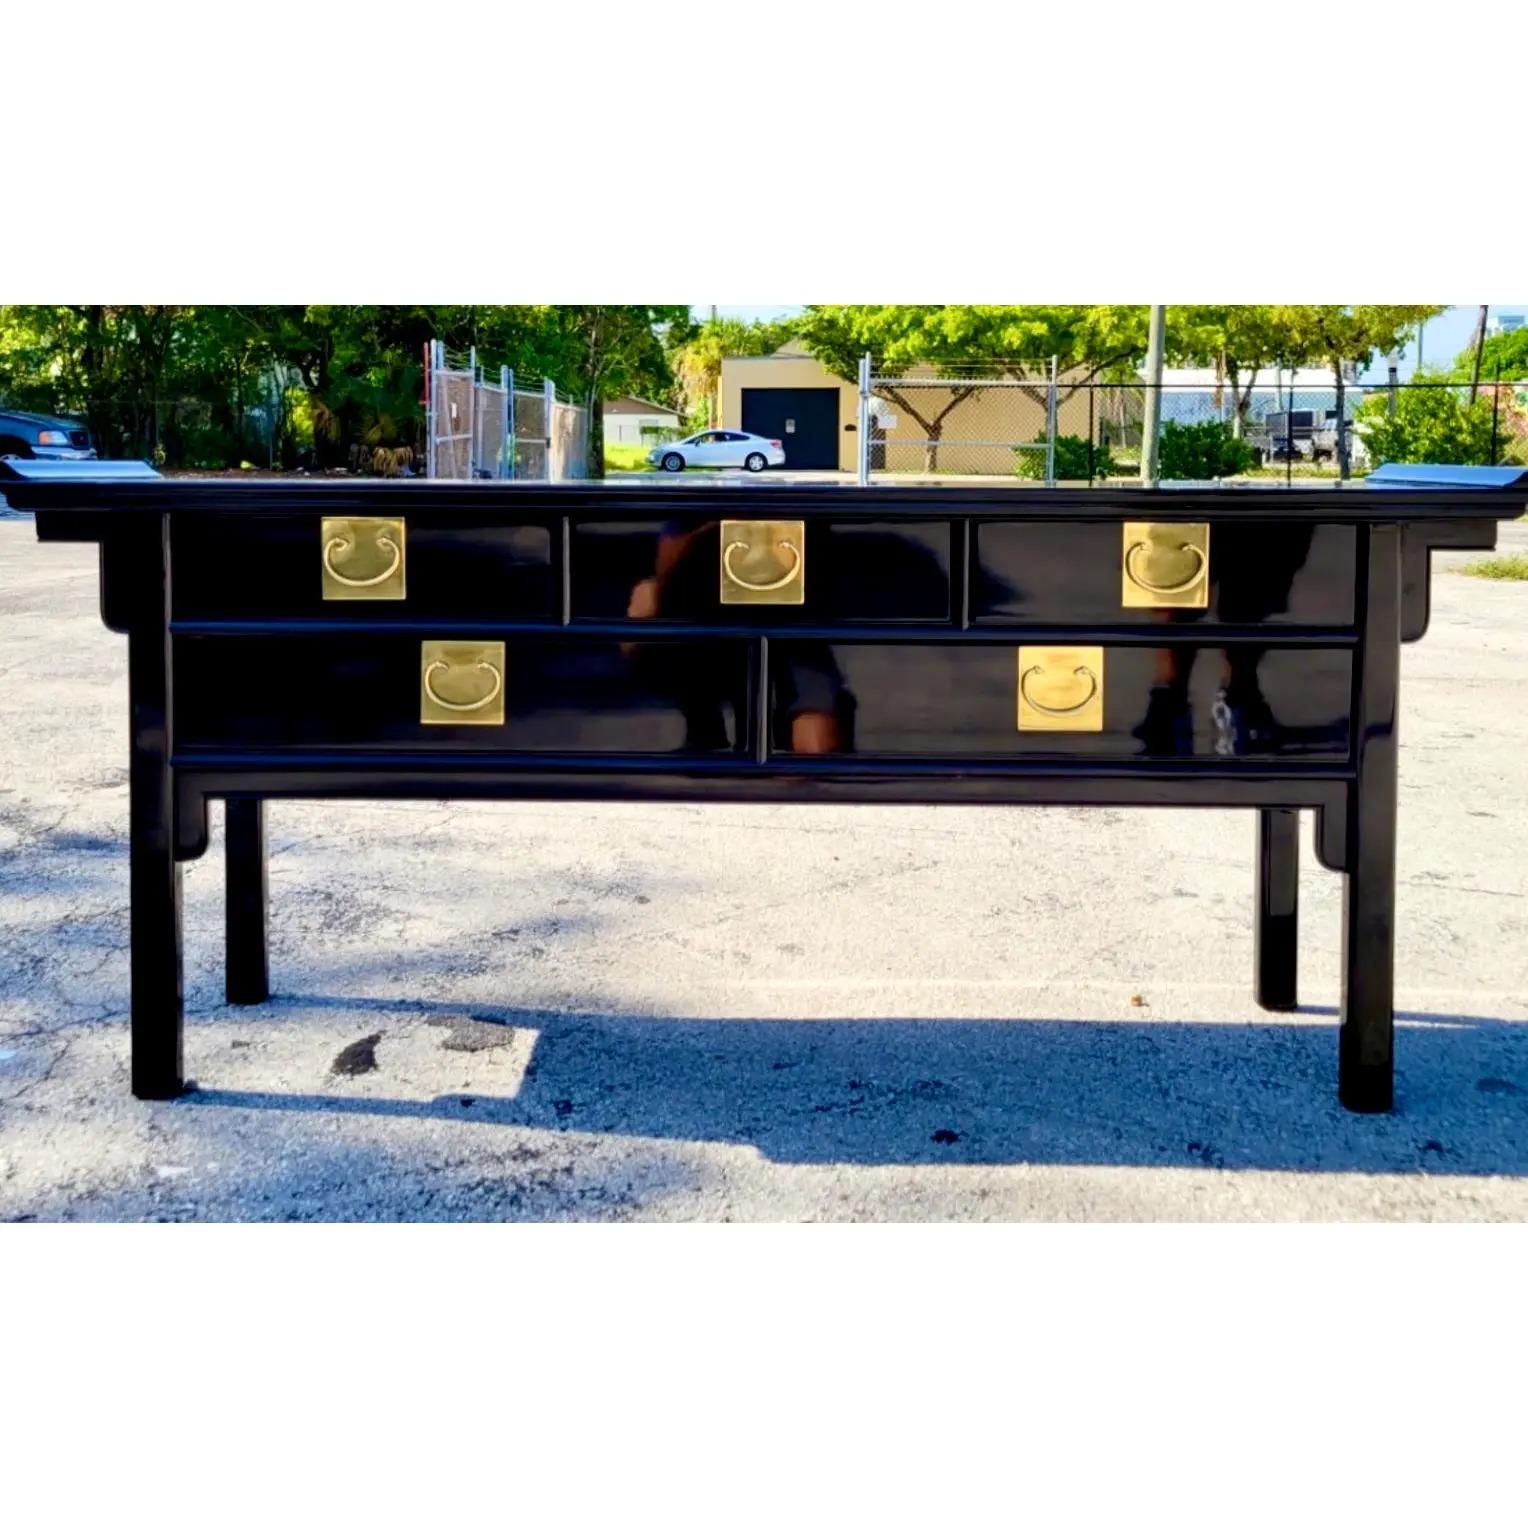 Incredible vintage century credenza. Chic black lacquer with heavy brass ming hardware. Pagoda wing details. Acquired from a Palm Beach estate.